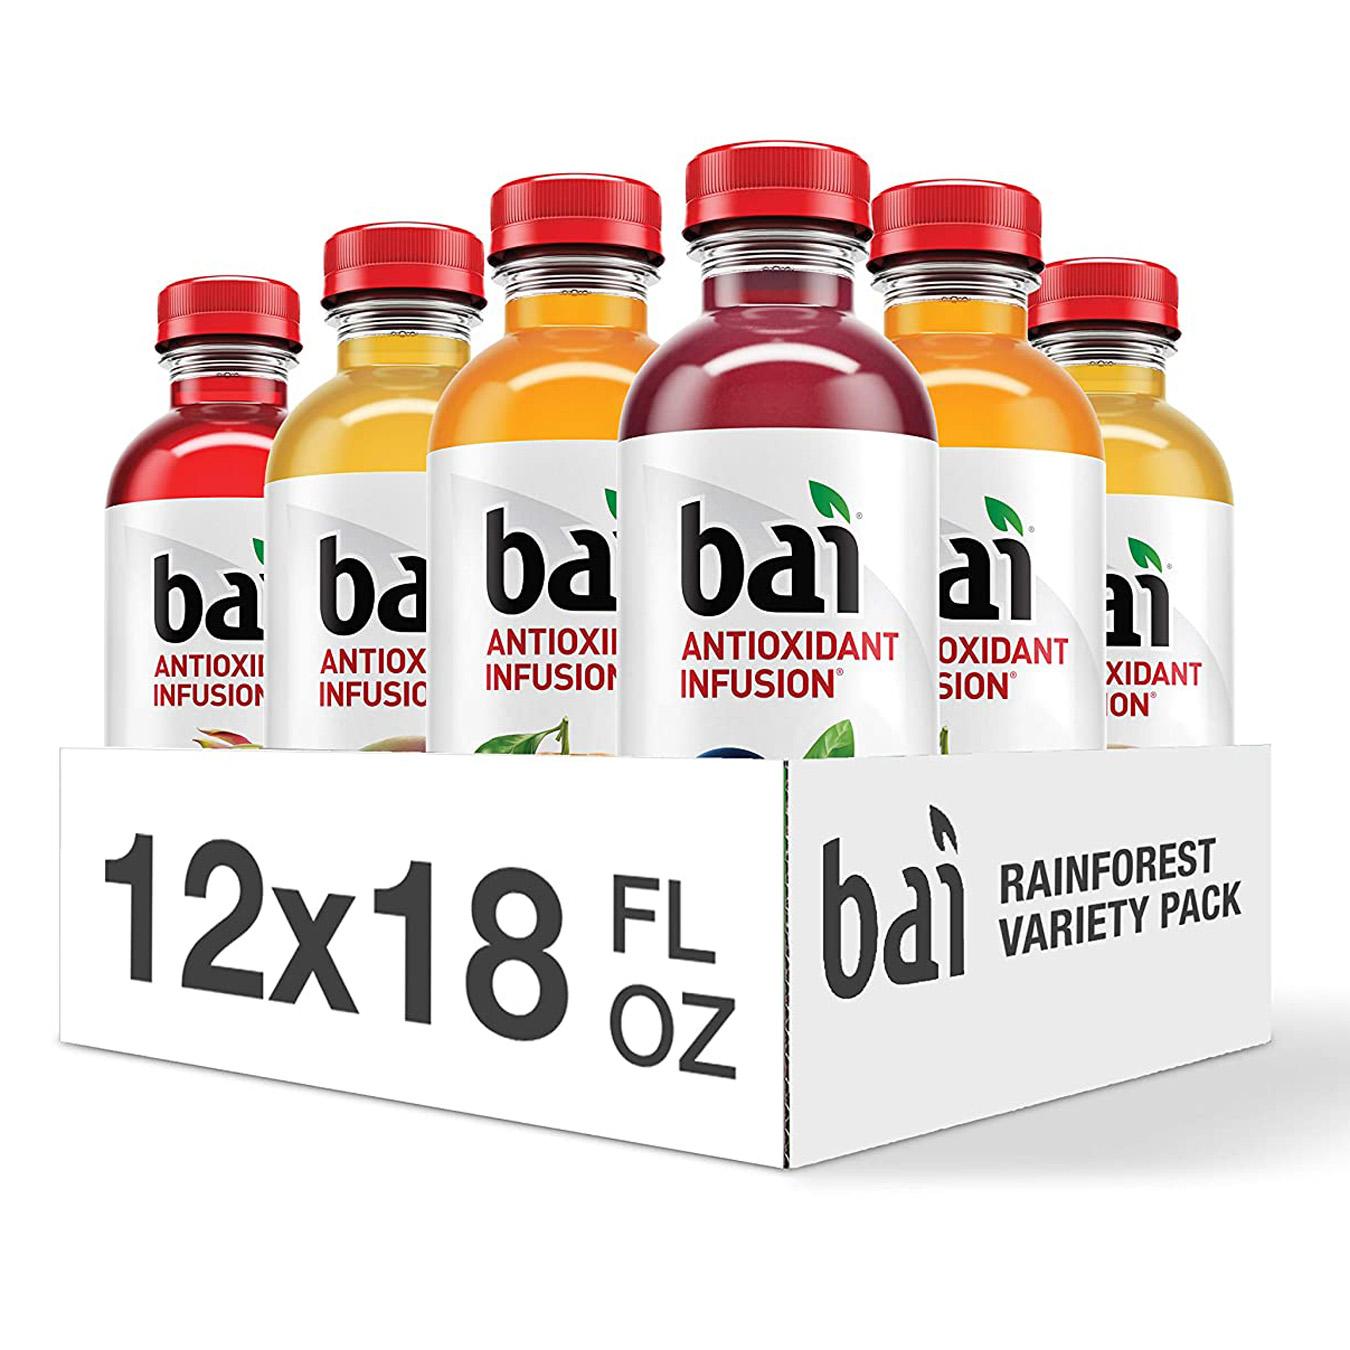 12 Bai Flavored Water for $10.07 Shipped